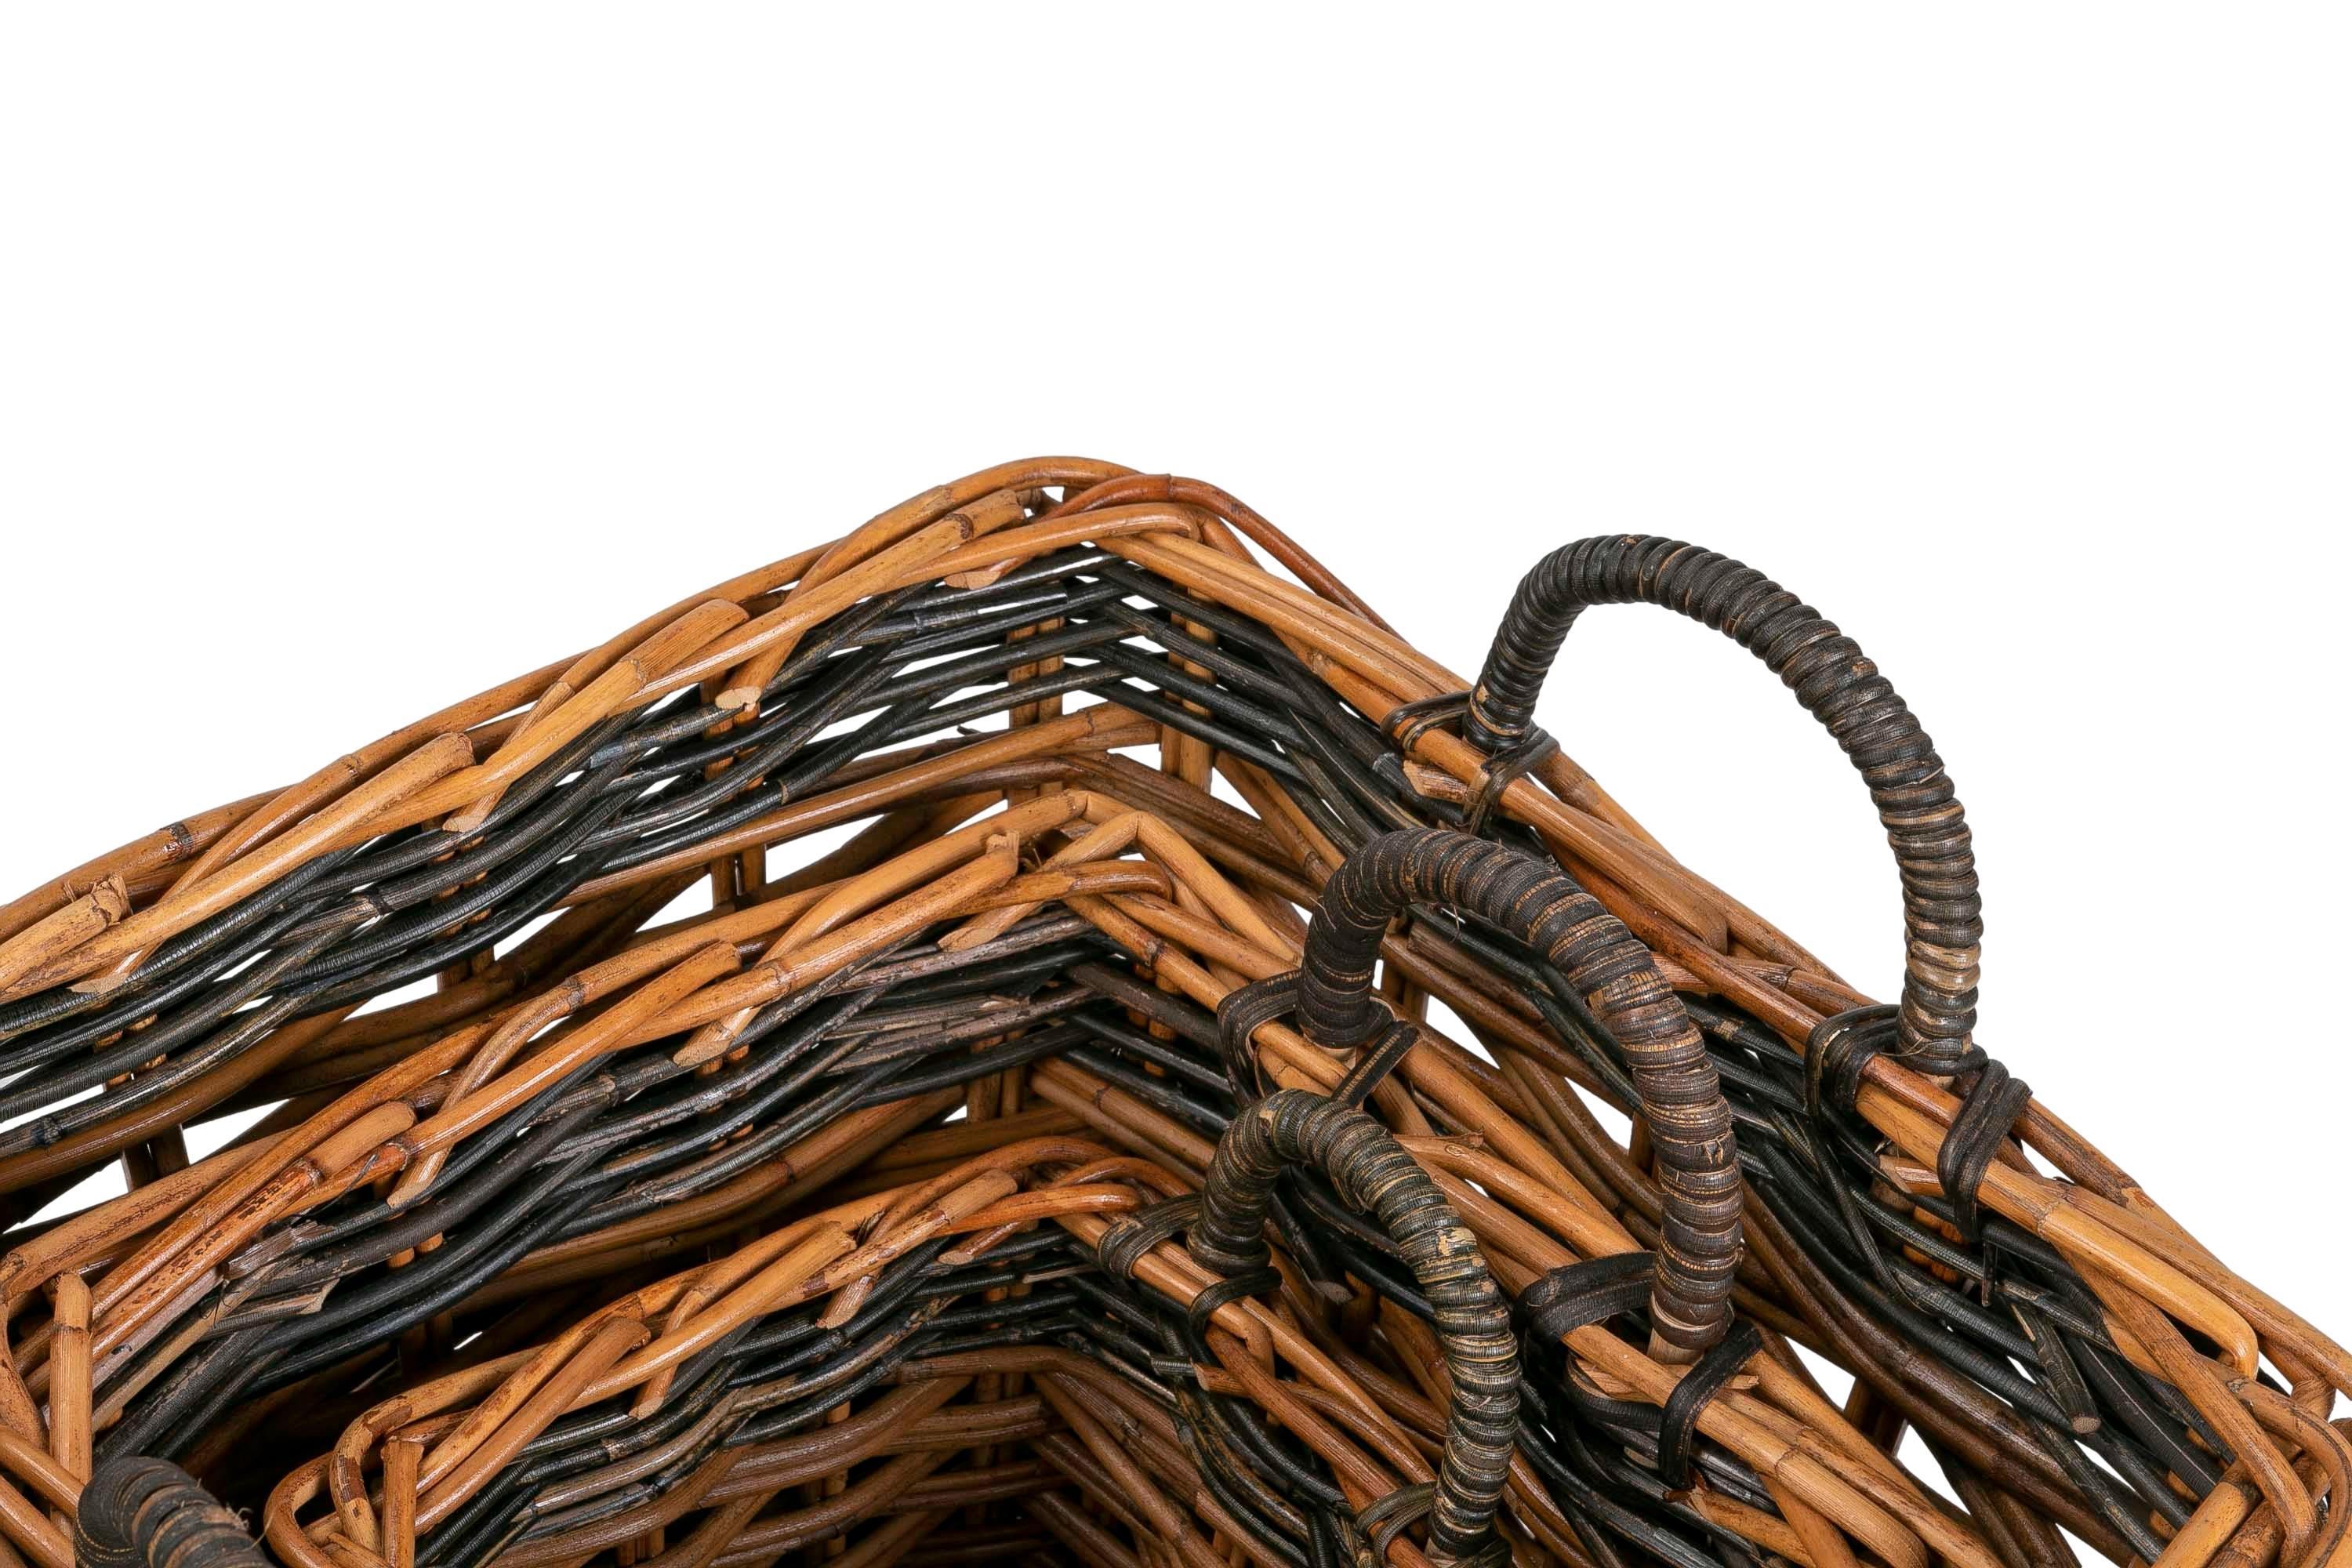 Set Consisting of Three Handmade Wicker Baskets For Sale 13